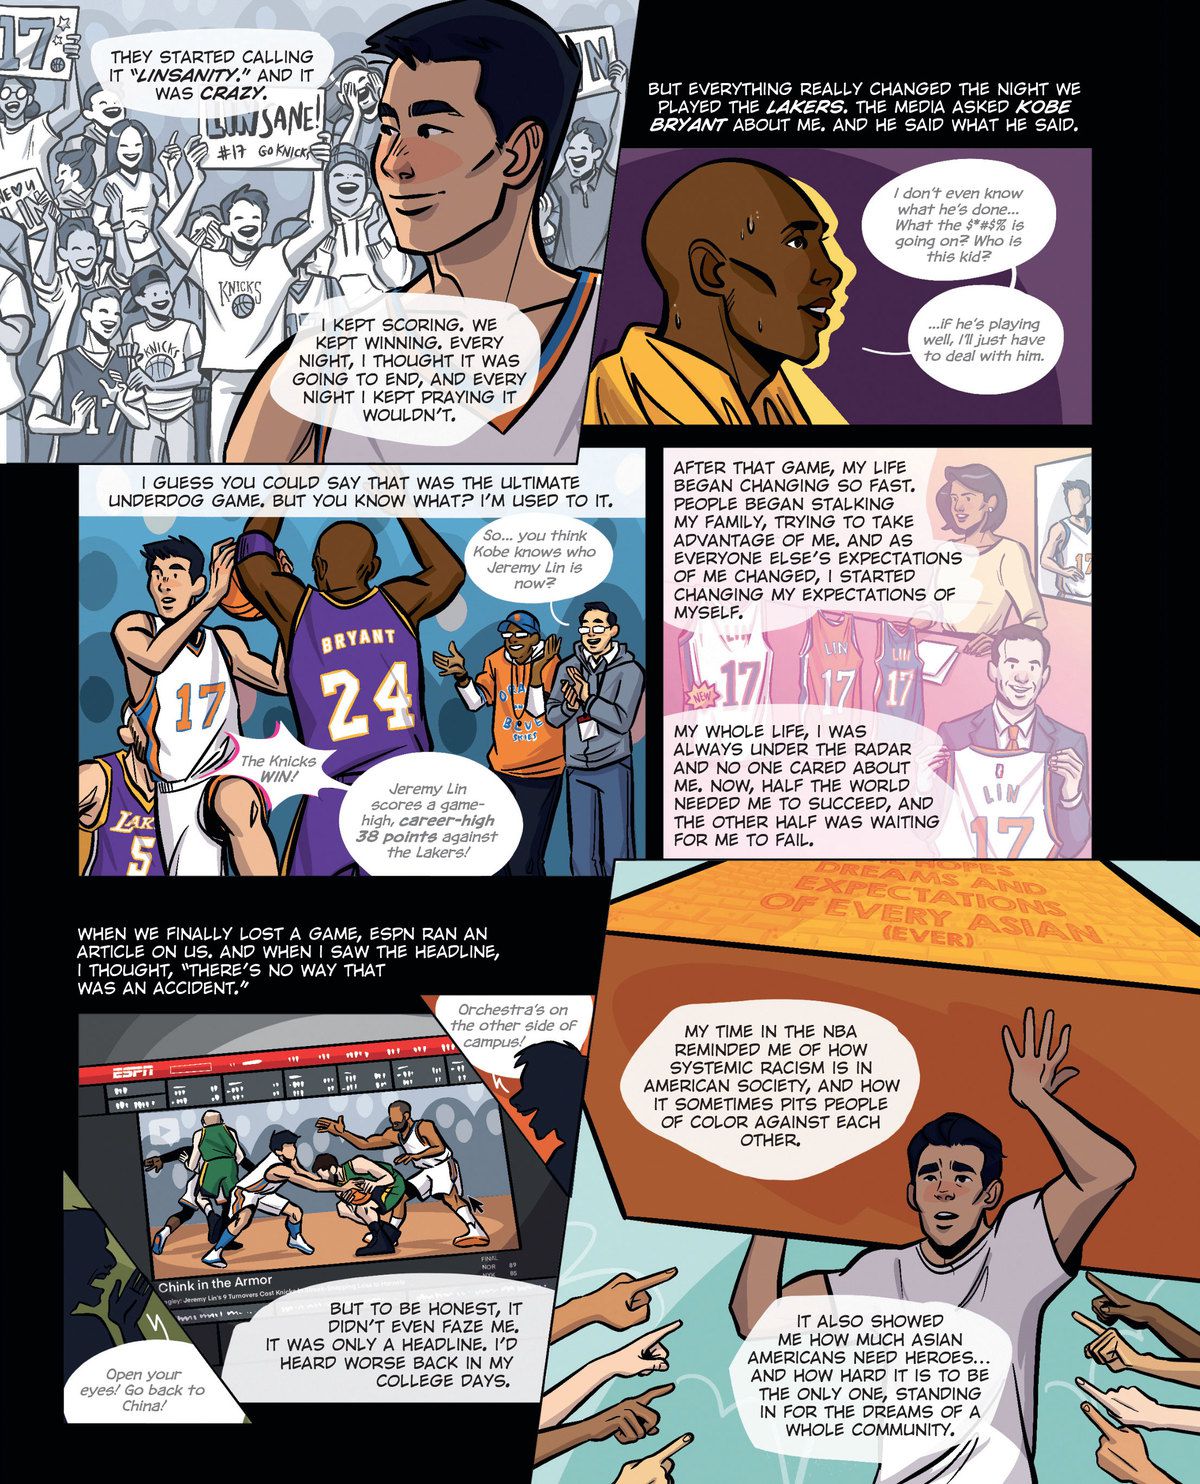 Page 3 of 4. Lin describes the highs and lows of the Linsanity period. He had a phenomenal game against Kobe Bryant and the Lakers, but he also began to experience immense pressure and his family faced abuse. Lin felt the pressure of representing Asian Americans in the NBA.